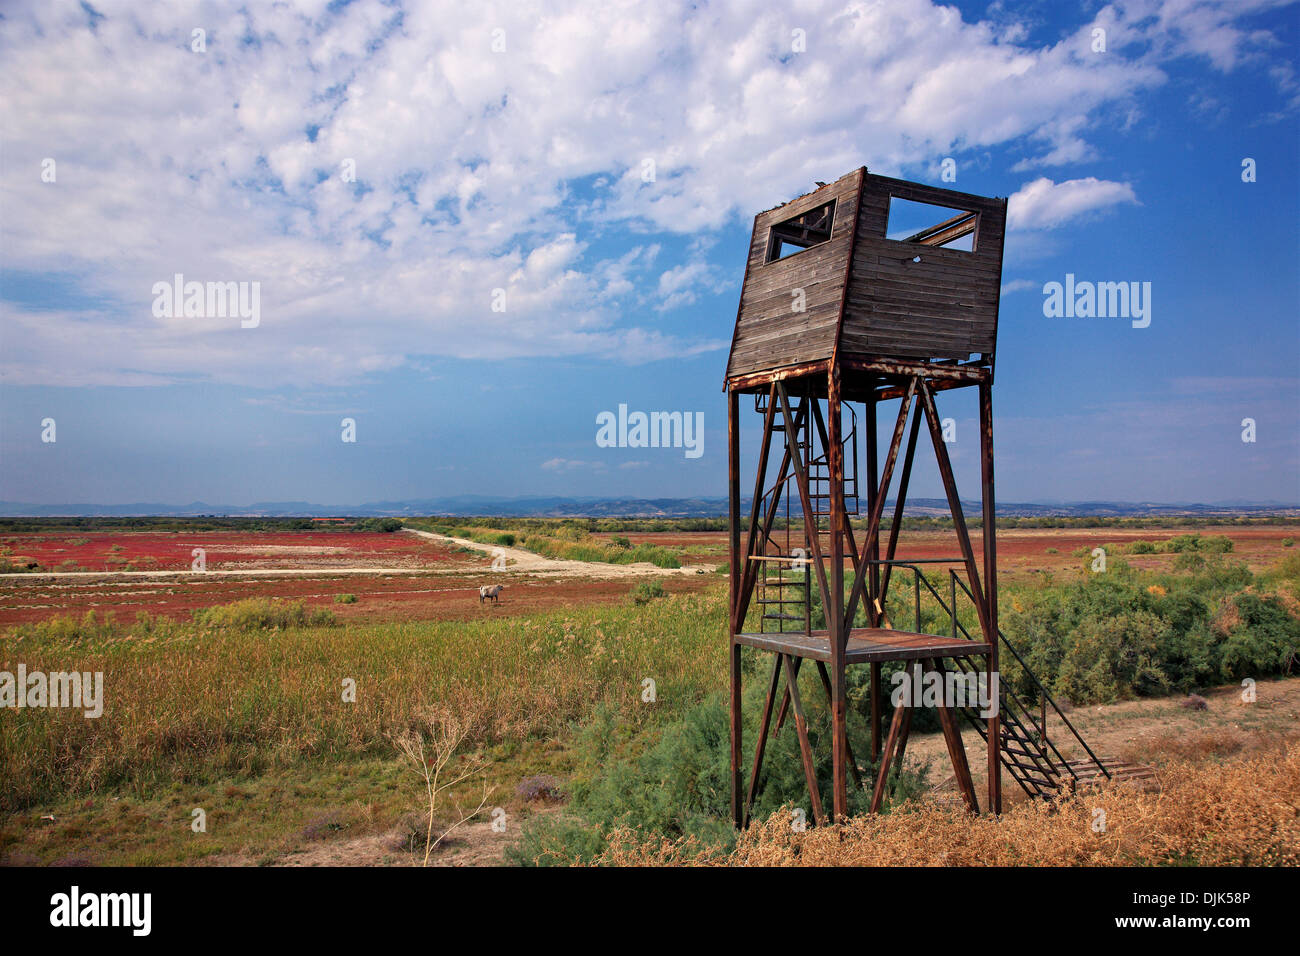 Abandoned watchtower at the Delta of Evros river, Thrace, Greece. Stock Photo